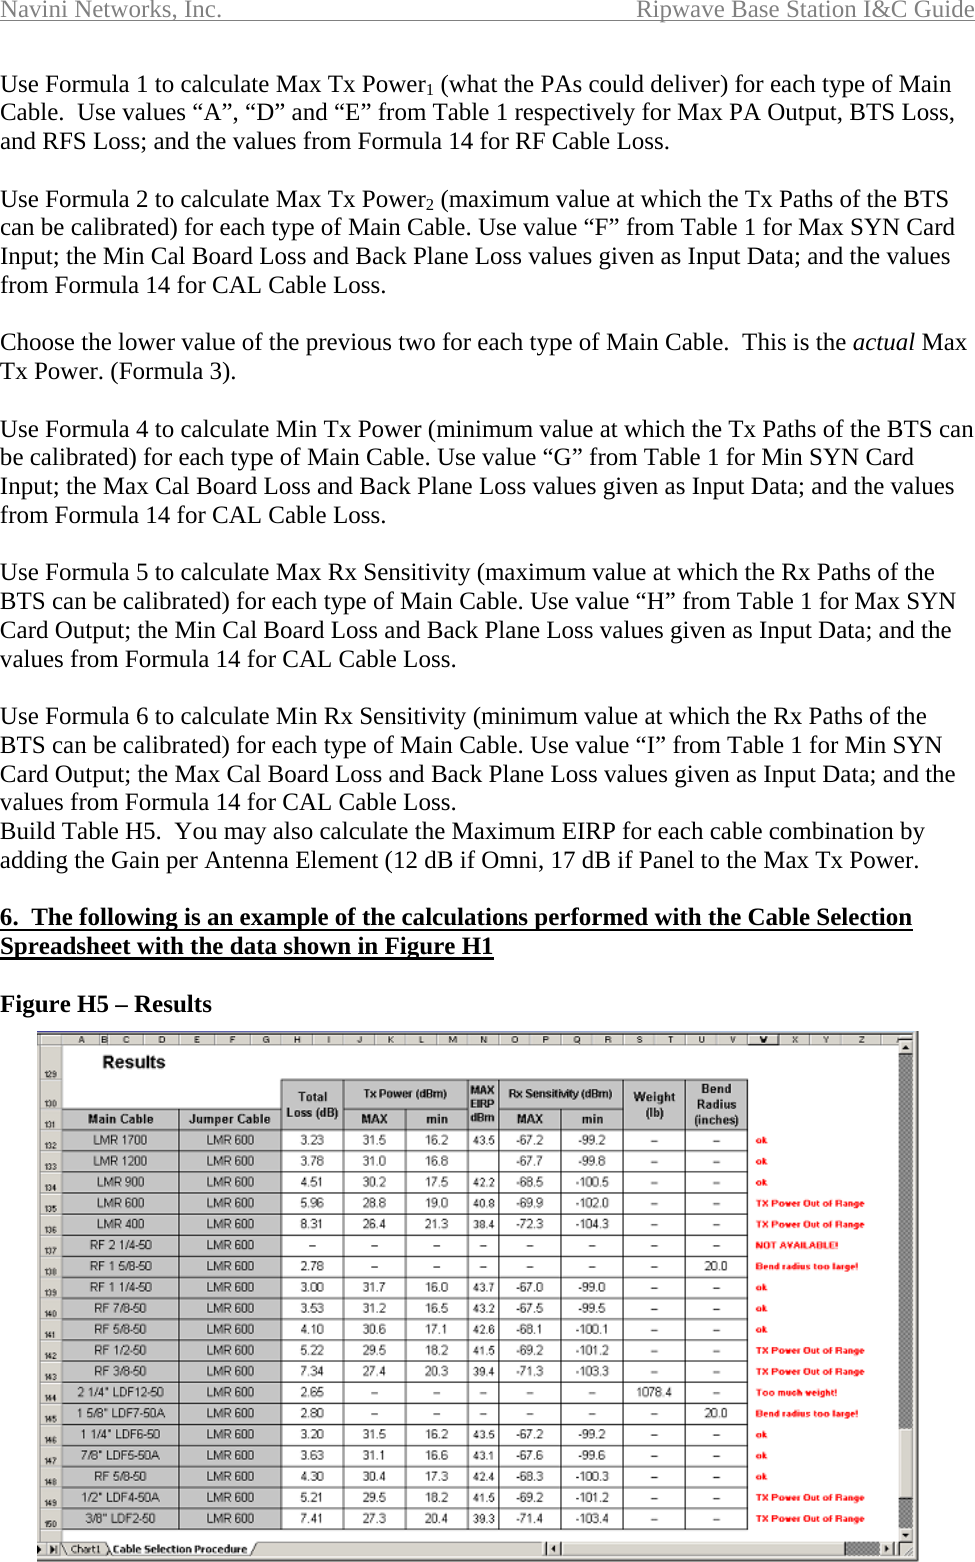 Navini Networks, Inc.  Ripwave Base Station I&amp;C Guide  116 Use Formula 1 to calculate Max Tx Power1 (what the PAs could deliver) for each type of Main Cable.  Use values “A”, “D” and “E” from Table 1 respectively for Max PA Output, BTS Loss, and RFS Loss; and the values from Formula 14 for RF Cable Loss.  Use Formula 2 to calculate Max Tx Power2 (maximum value at which the Tx Paths of the BTS can be calibrated) for each type of Main Cable. Use value “F” from Table 1 for Max SYN Card Input; the Min Cal Board Loss and Back Plane Loss values given as Input Data; and the values from Formula 14 for CAL Cable Loss.  Choose the lower value of the previous two for each type of Main Cable.  This is the actual Max Tx Power. (Formula 3).  Use Formula 4 to calculate Min Tx Power (minimum value at which the Tx Paths of the BTS can be calibrated) for each type of Main Cable. Use value “G” from Table 1 for Min SYN Card Input; the Max Cal Board Loss and Back Plane Loss values given as Input Data; and the values from Formula 14 for CAL Cable Loss.  Use Formula 5 to calculate Max Rx Sensitivity (maximum value at which the Rx Paths of the BTS can be calibrated) for each type of Main Cable. Use value “H” from Table 1 for Max SYN Card Output; the Min Cal Board Loss and Back Plane Loss values given as Input Data; and the values from Formula 14 for CAL Cable Loss.  Use Formula 6 to calculate Min Rx Sensitivity (minimum value at which the Rx Paths of the BTS can be calibrated) for each type of Main Cable. Use value “I” from Table 1 for Min SYN Card Output; the Max Cal Board Loss and Back Plane Loss values given as Input Data; and the values from Formula 14 for CAL Cable Loss. Build Table H5.  You may also calculate the Maximum EIRP for each cable combination by adding the Gain per Antenna Element (12 dB if Omni, 17 dB if Panel to the Max Tx Power.  6.  The following is an example of the calculations performed with the Cable Selection Spreadsheet with the data shown in Figure H1  Figure H5 – Results 